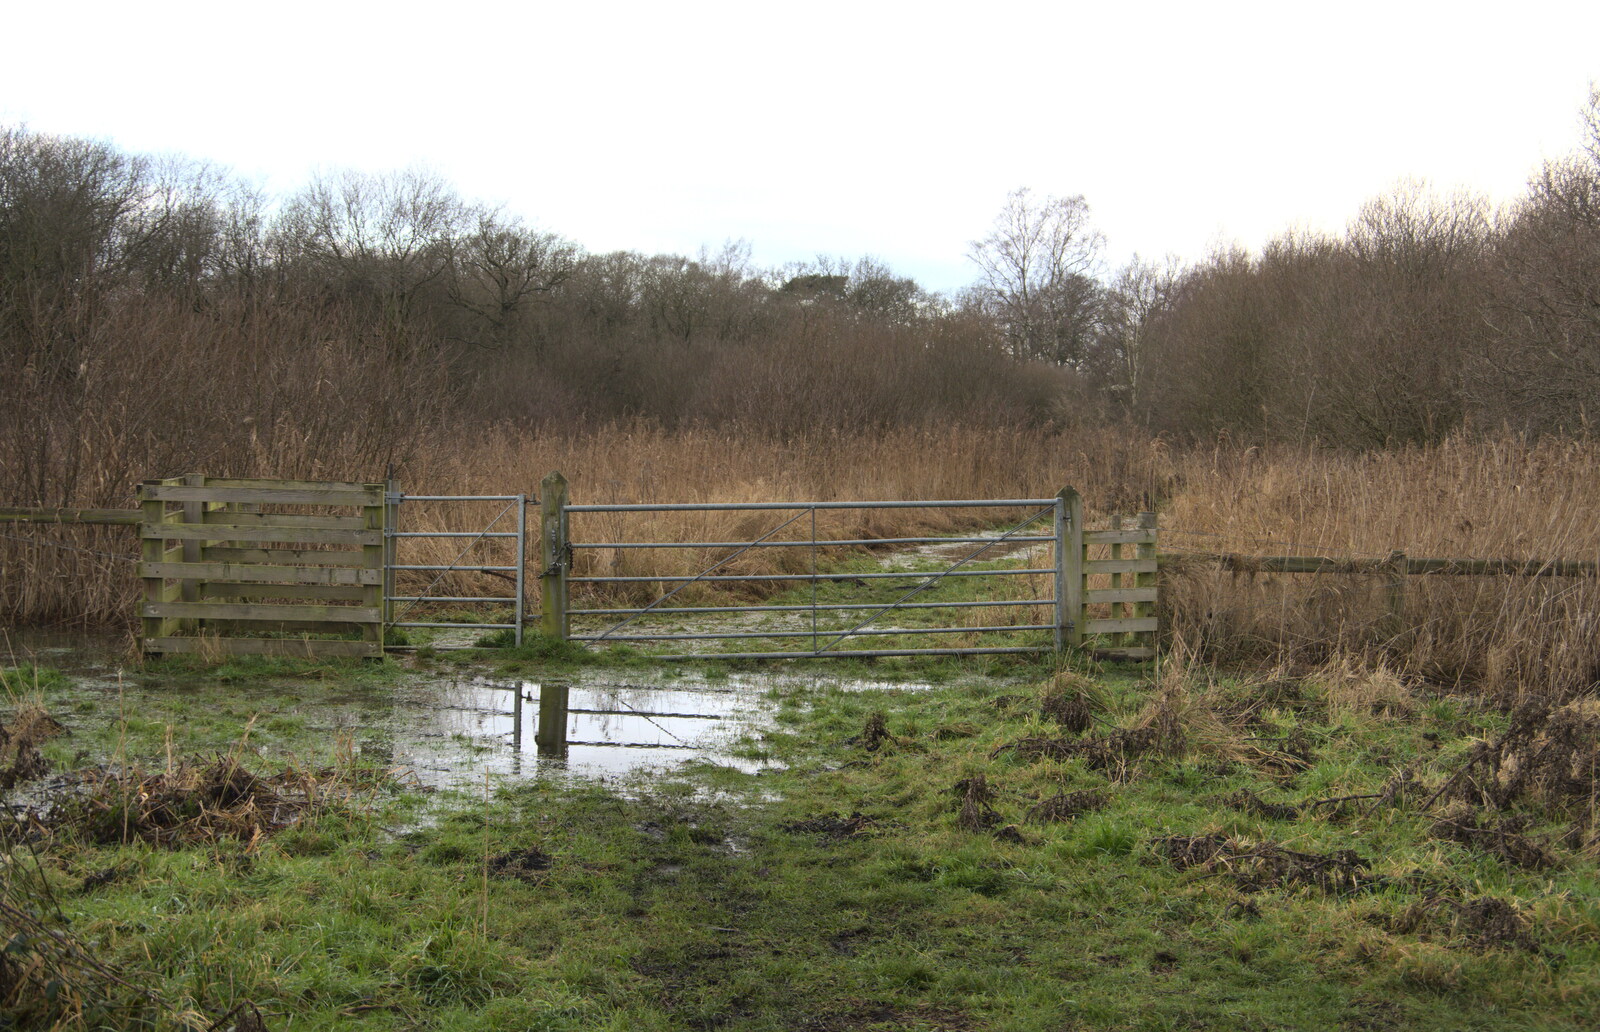 A gate in the fen from A Walk Around Redgrave and Lopham Fen, Redgrave, Suffolk - 3rd January 2021